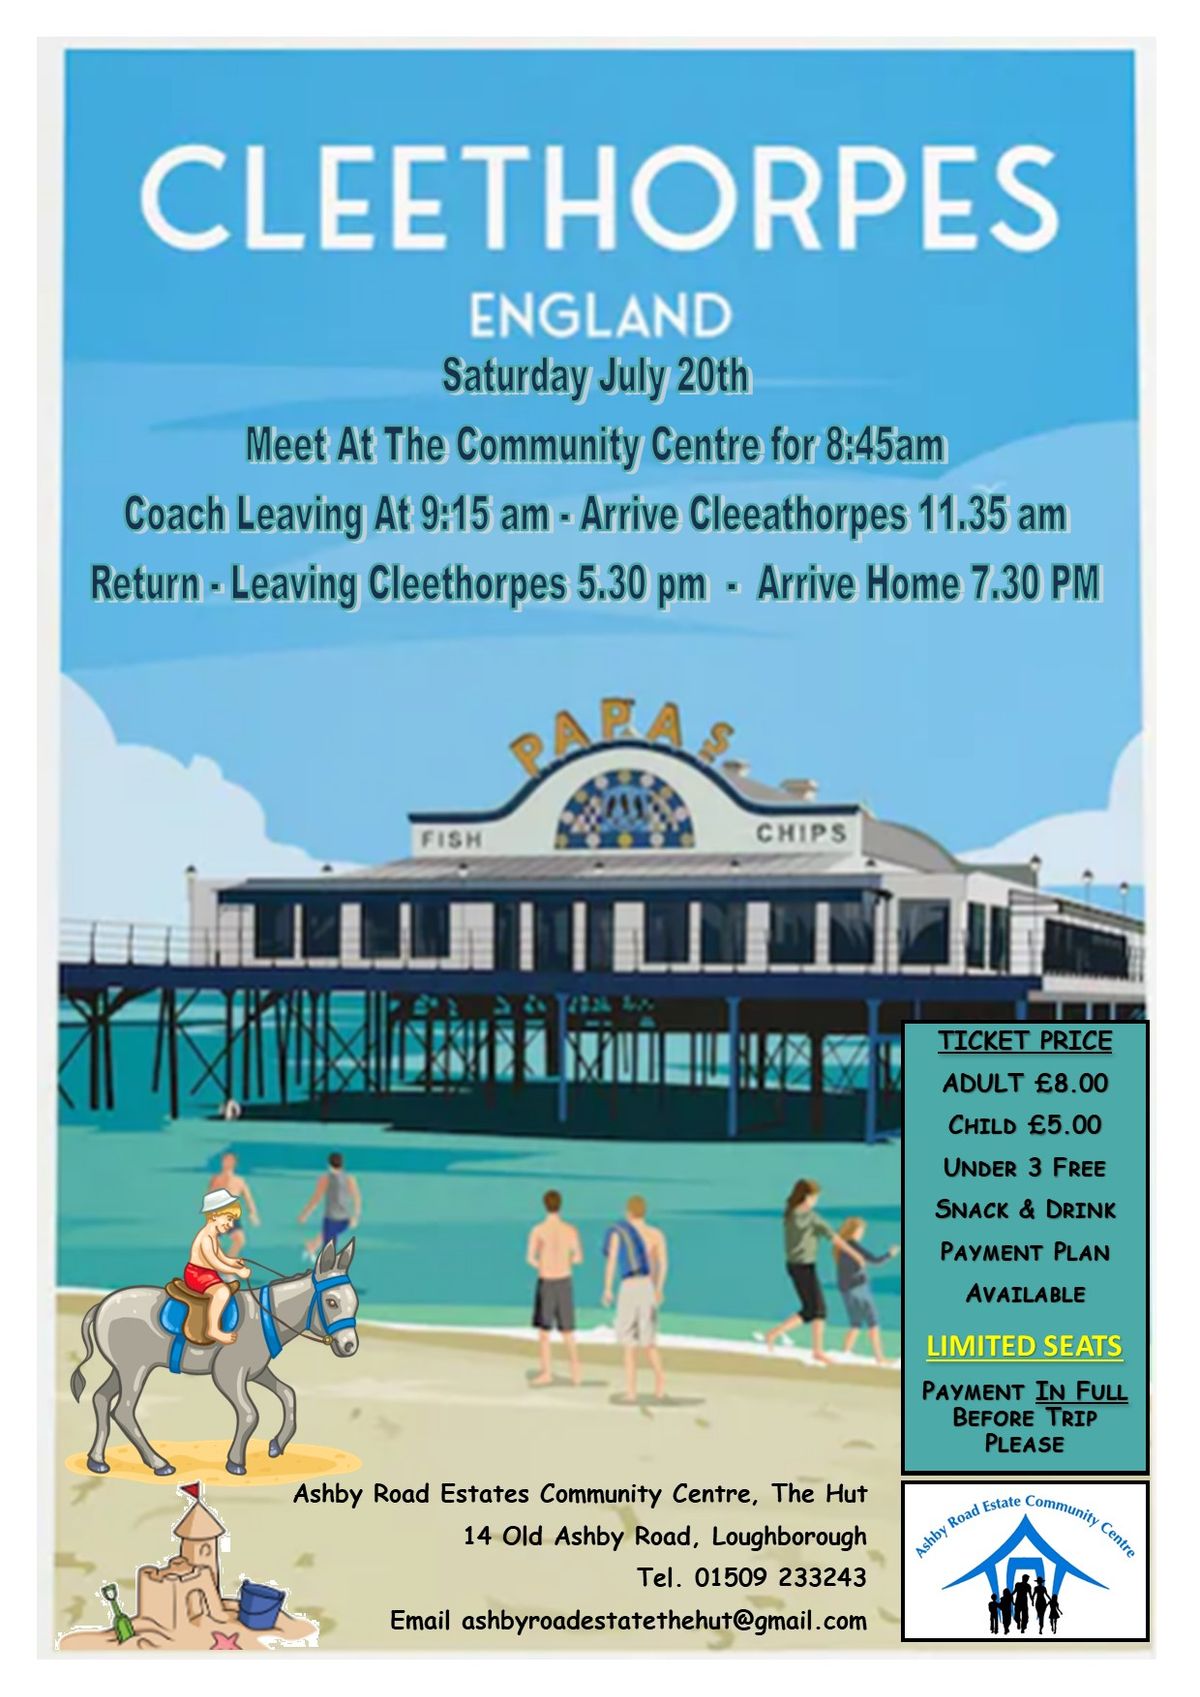 Cleethorpes ARECA community day out